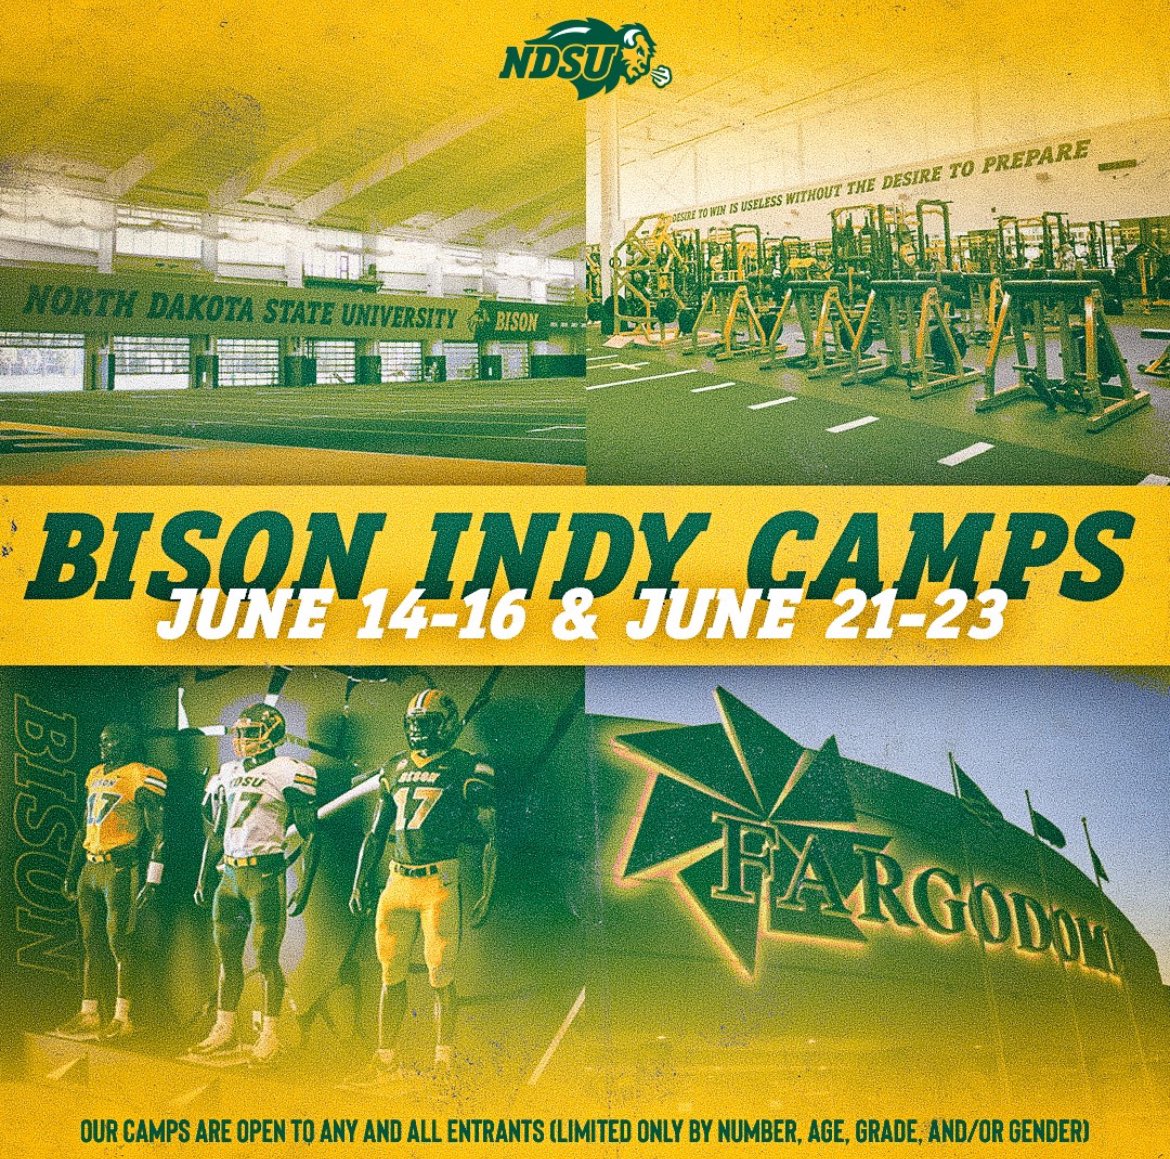 Thank you @DavidWienke15 for the invite!! Can’t wait to come compete at NDSU!!🟡🟢 @PrepRedzoneWI @MJ_NFLDraft @OLMafia @HUHS_Football